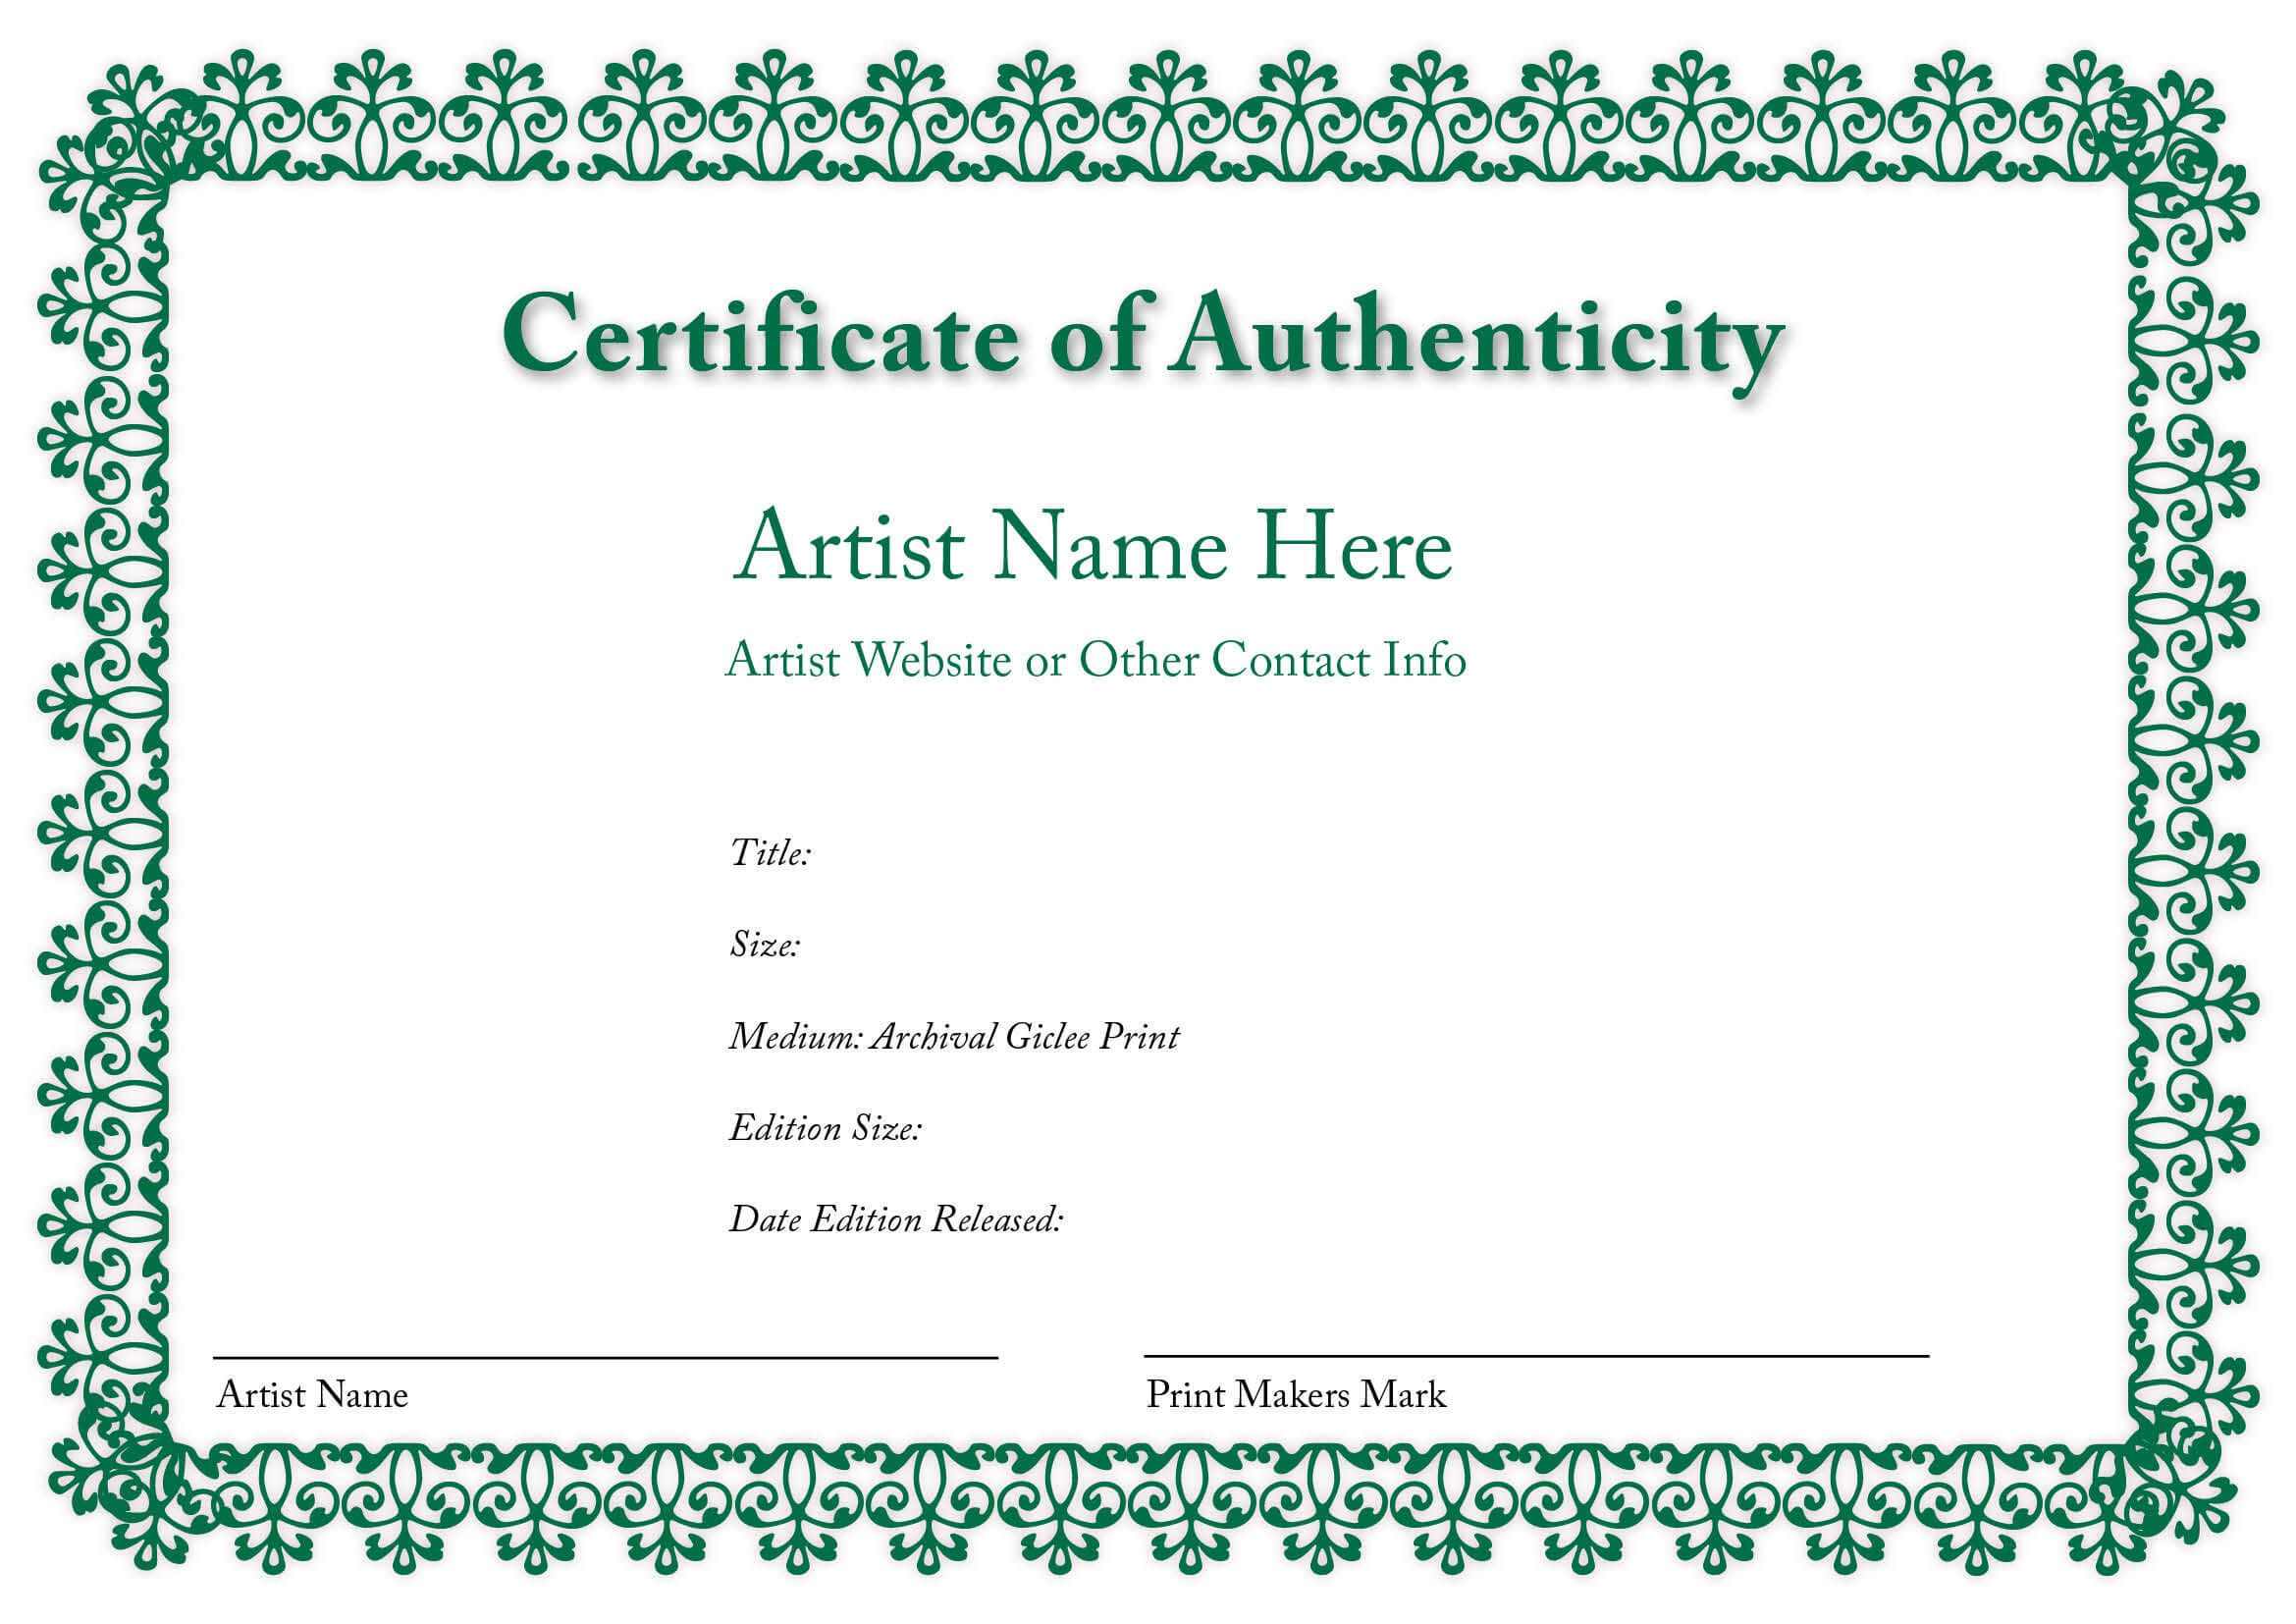 Certificate Of Authenticity Of An Art Print | Certificates With Certificate Of Authenticity Photography Template